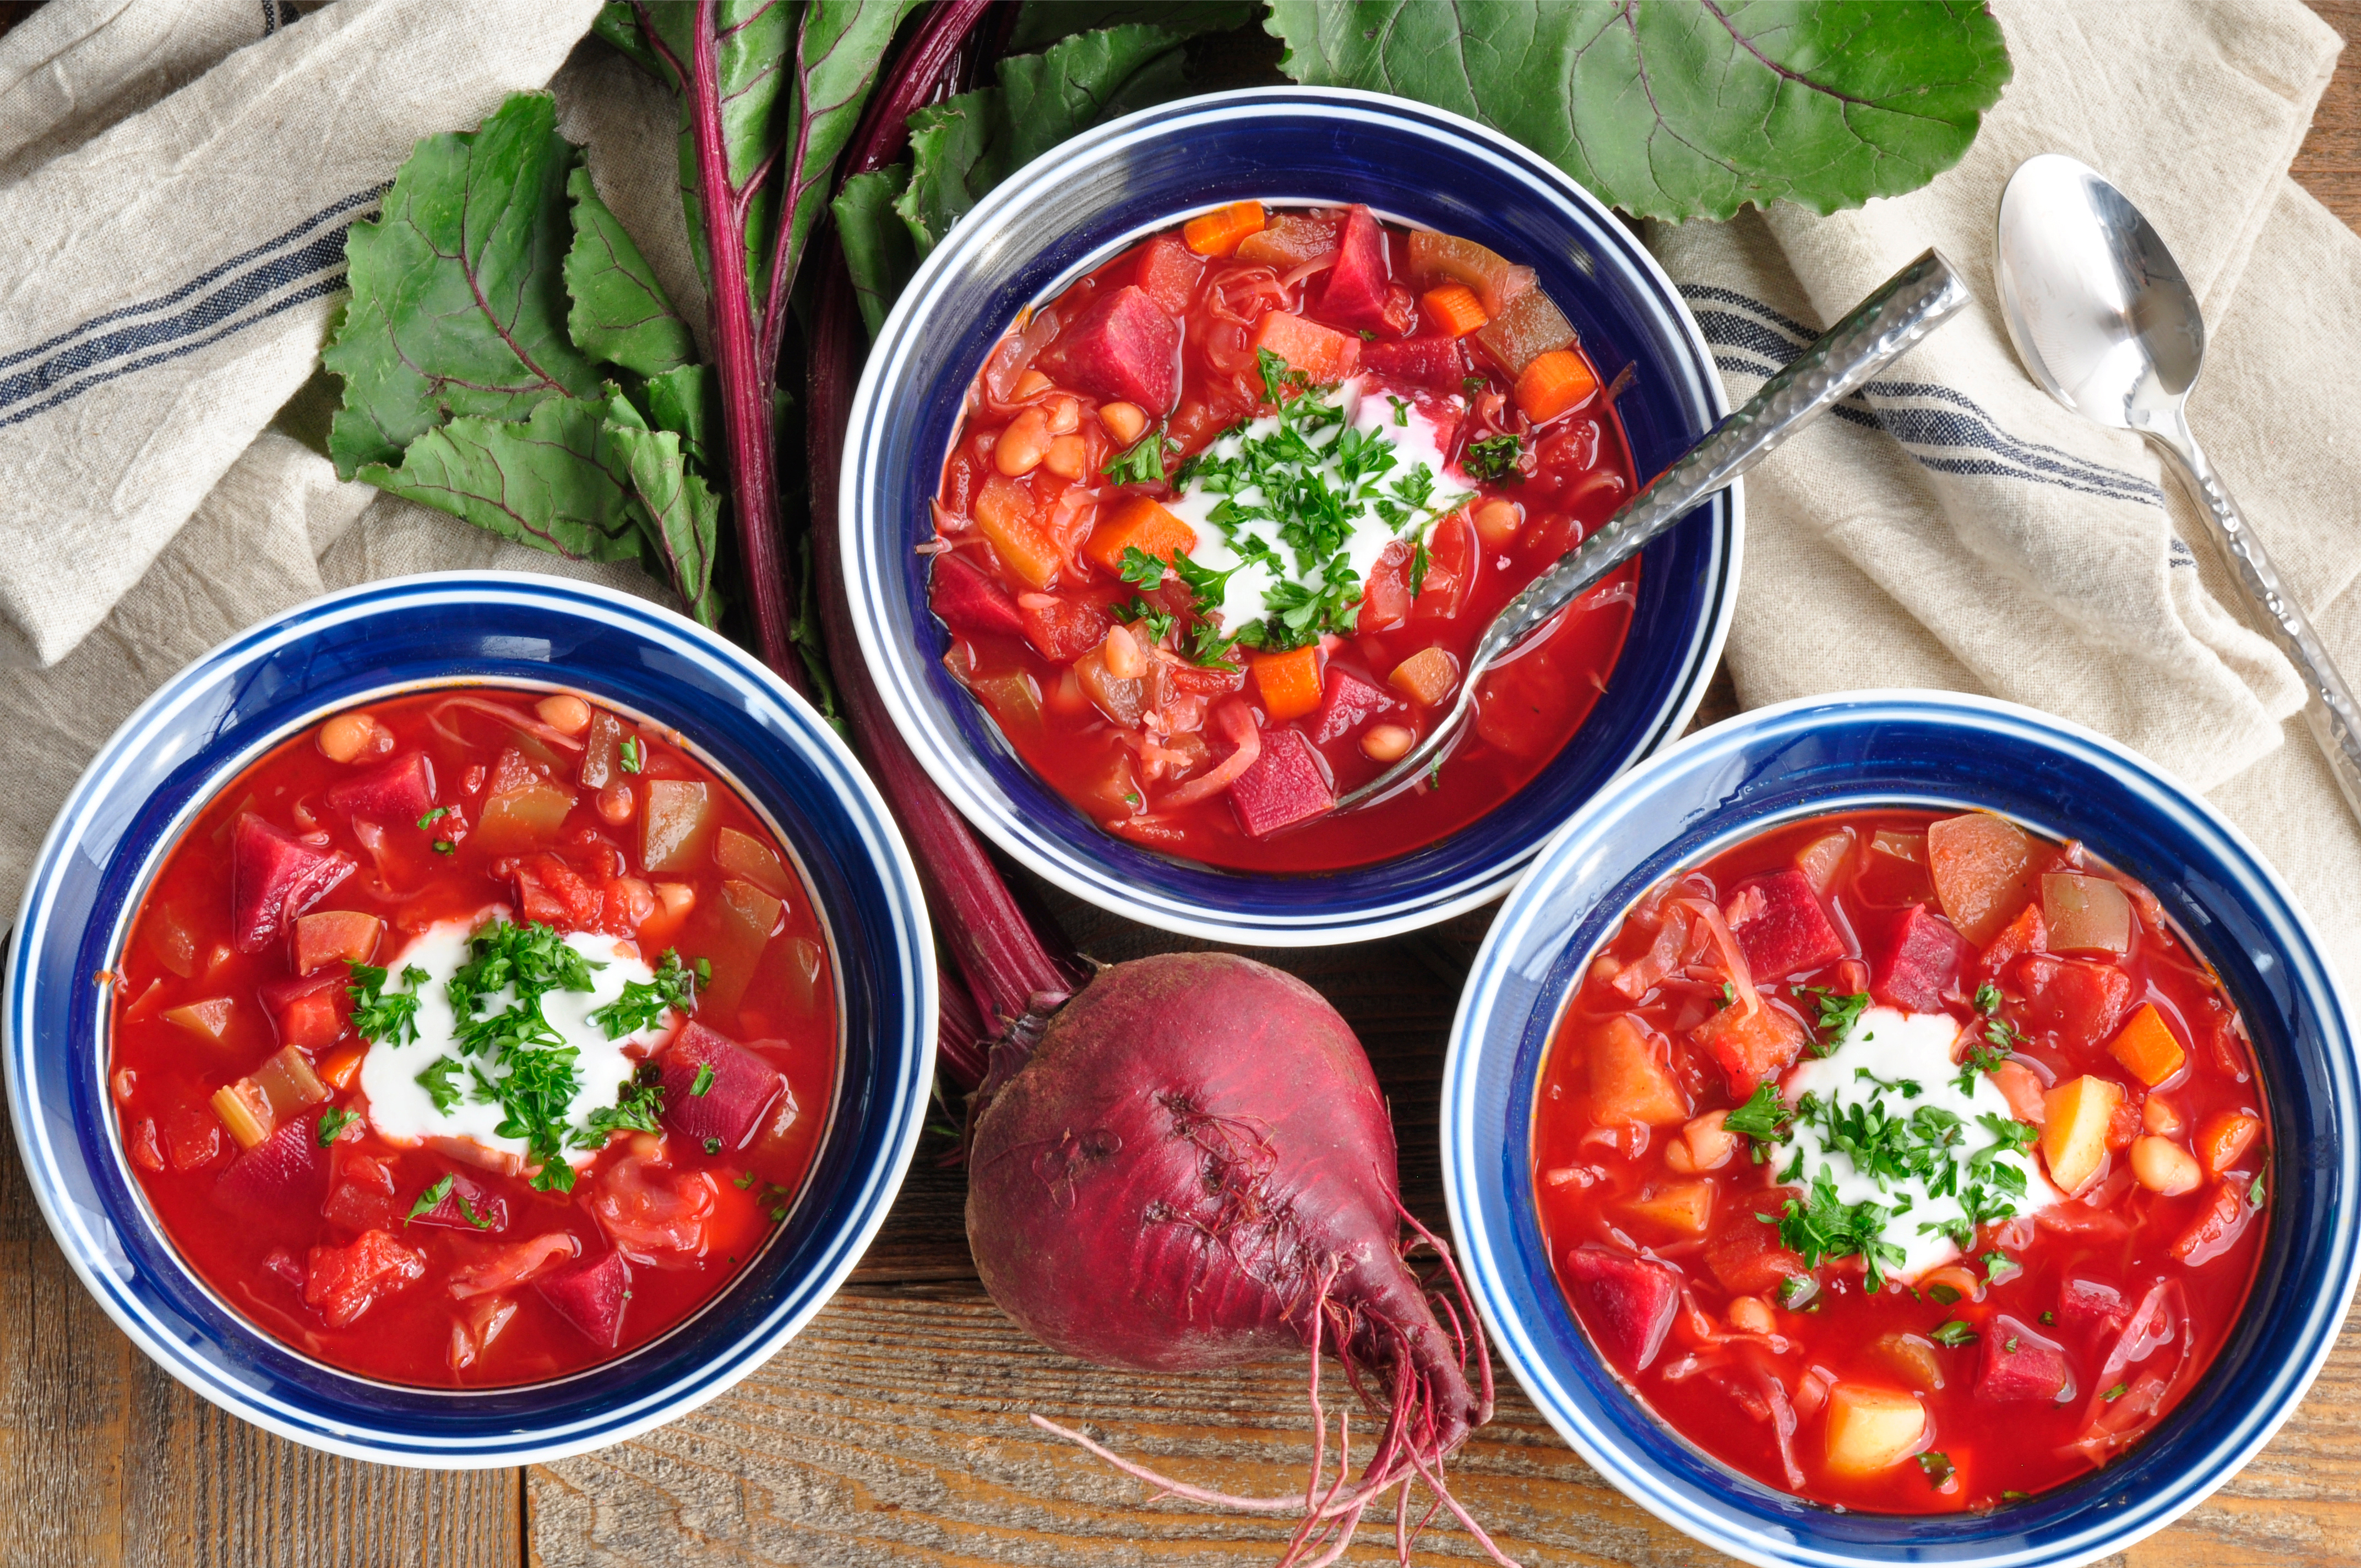 Vegetarian Borscht Dish served in bowls on wood table